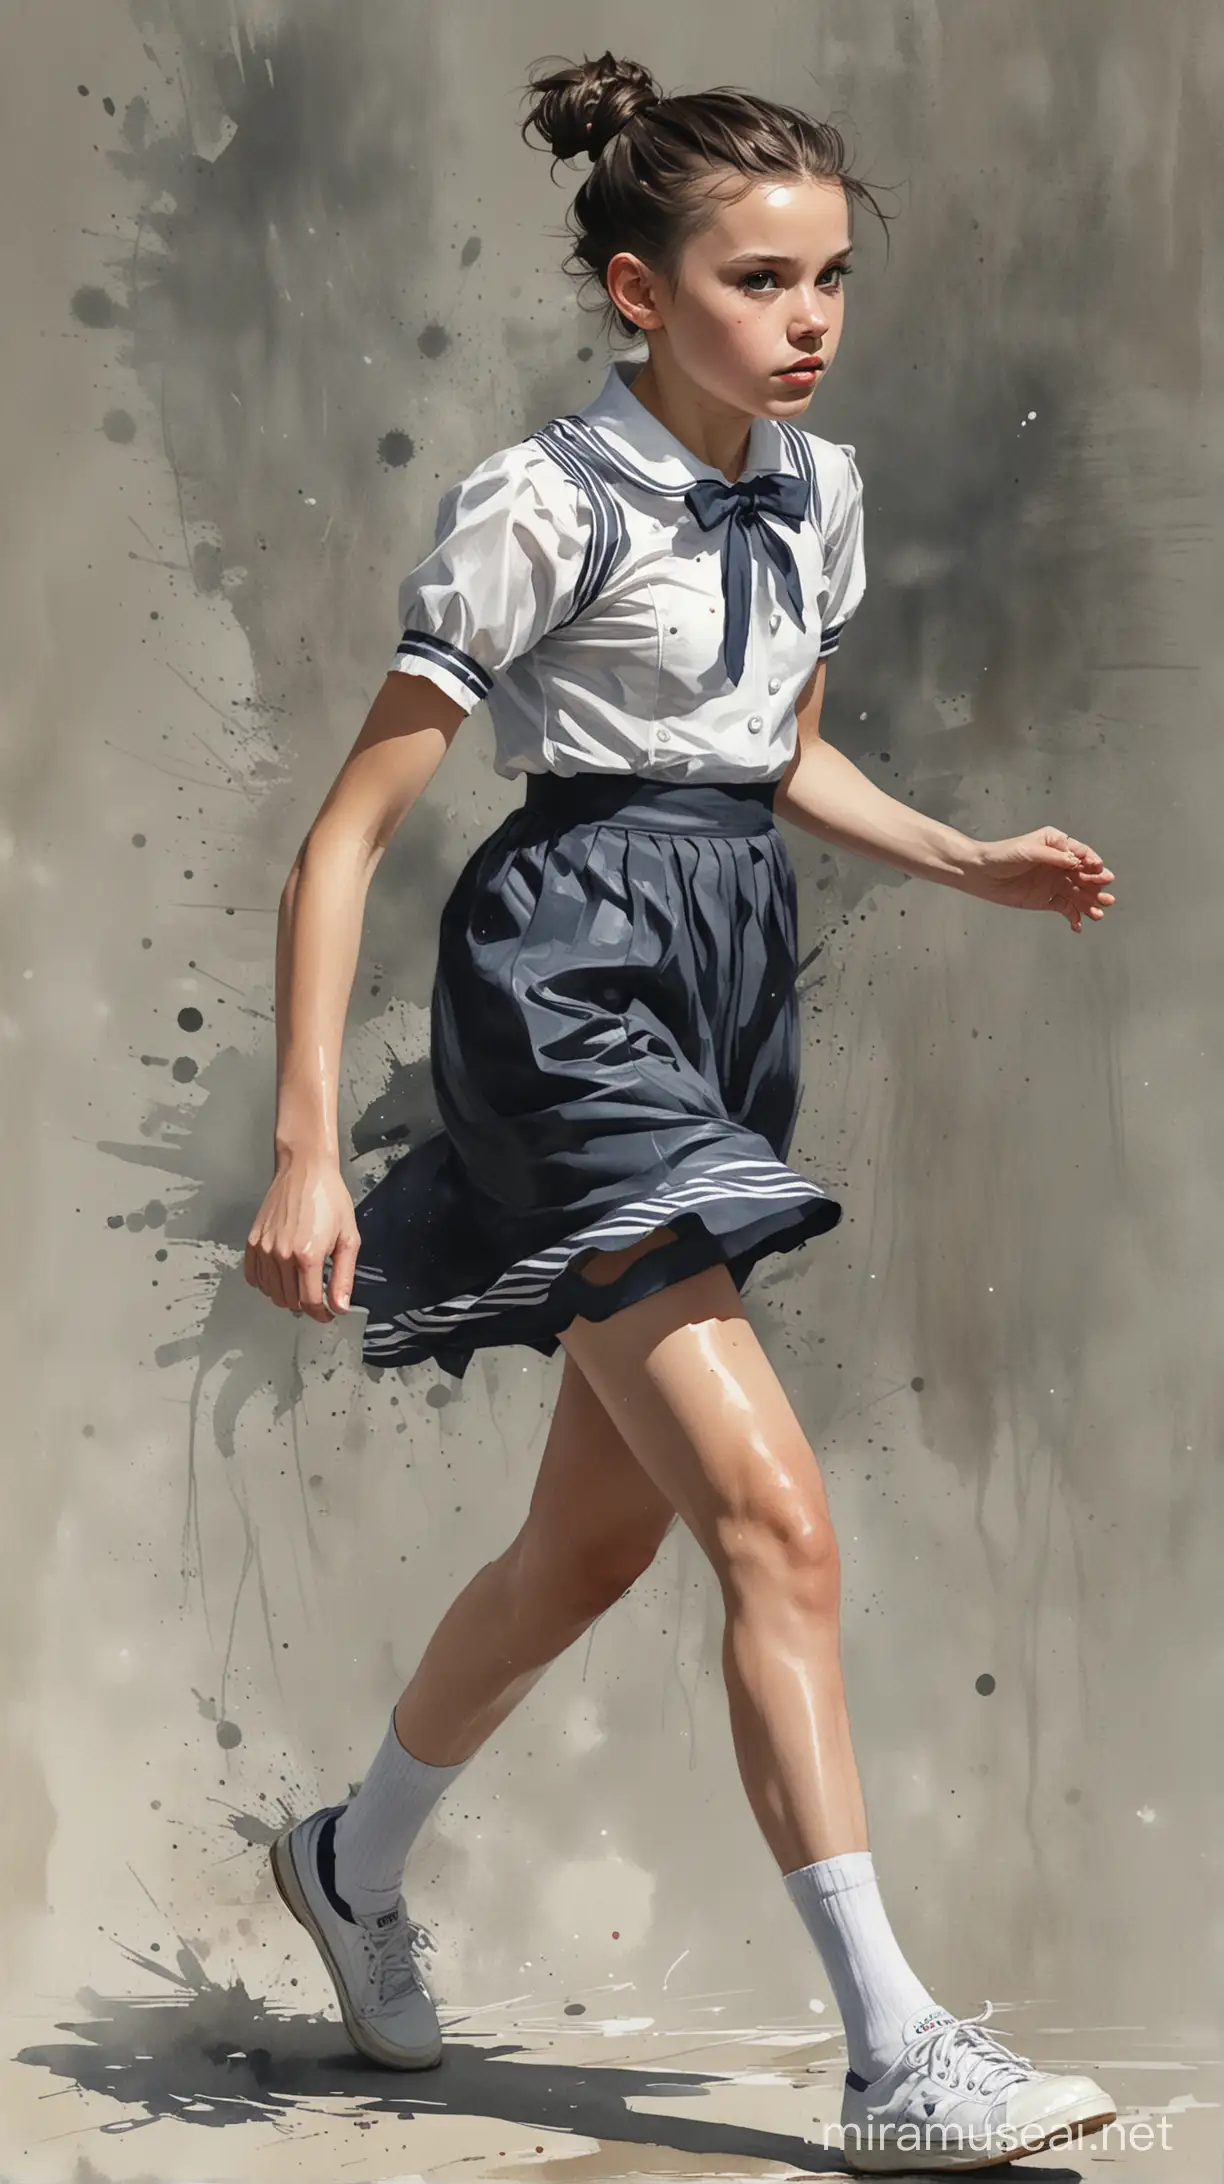 Alex Maleev illustration depicting preteen child Millie Bobby Brown wearing sailor school dress, fishnets stockings, white flat pumps, smooth shapely legs, running, bun hair, messy watercolor, no distortion, gray palette, insanely high detail, very high quality, seen from slightly behind